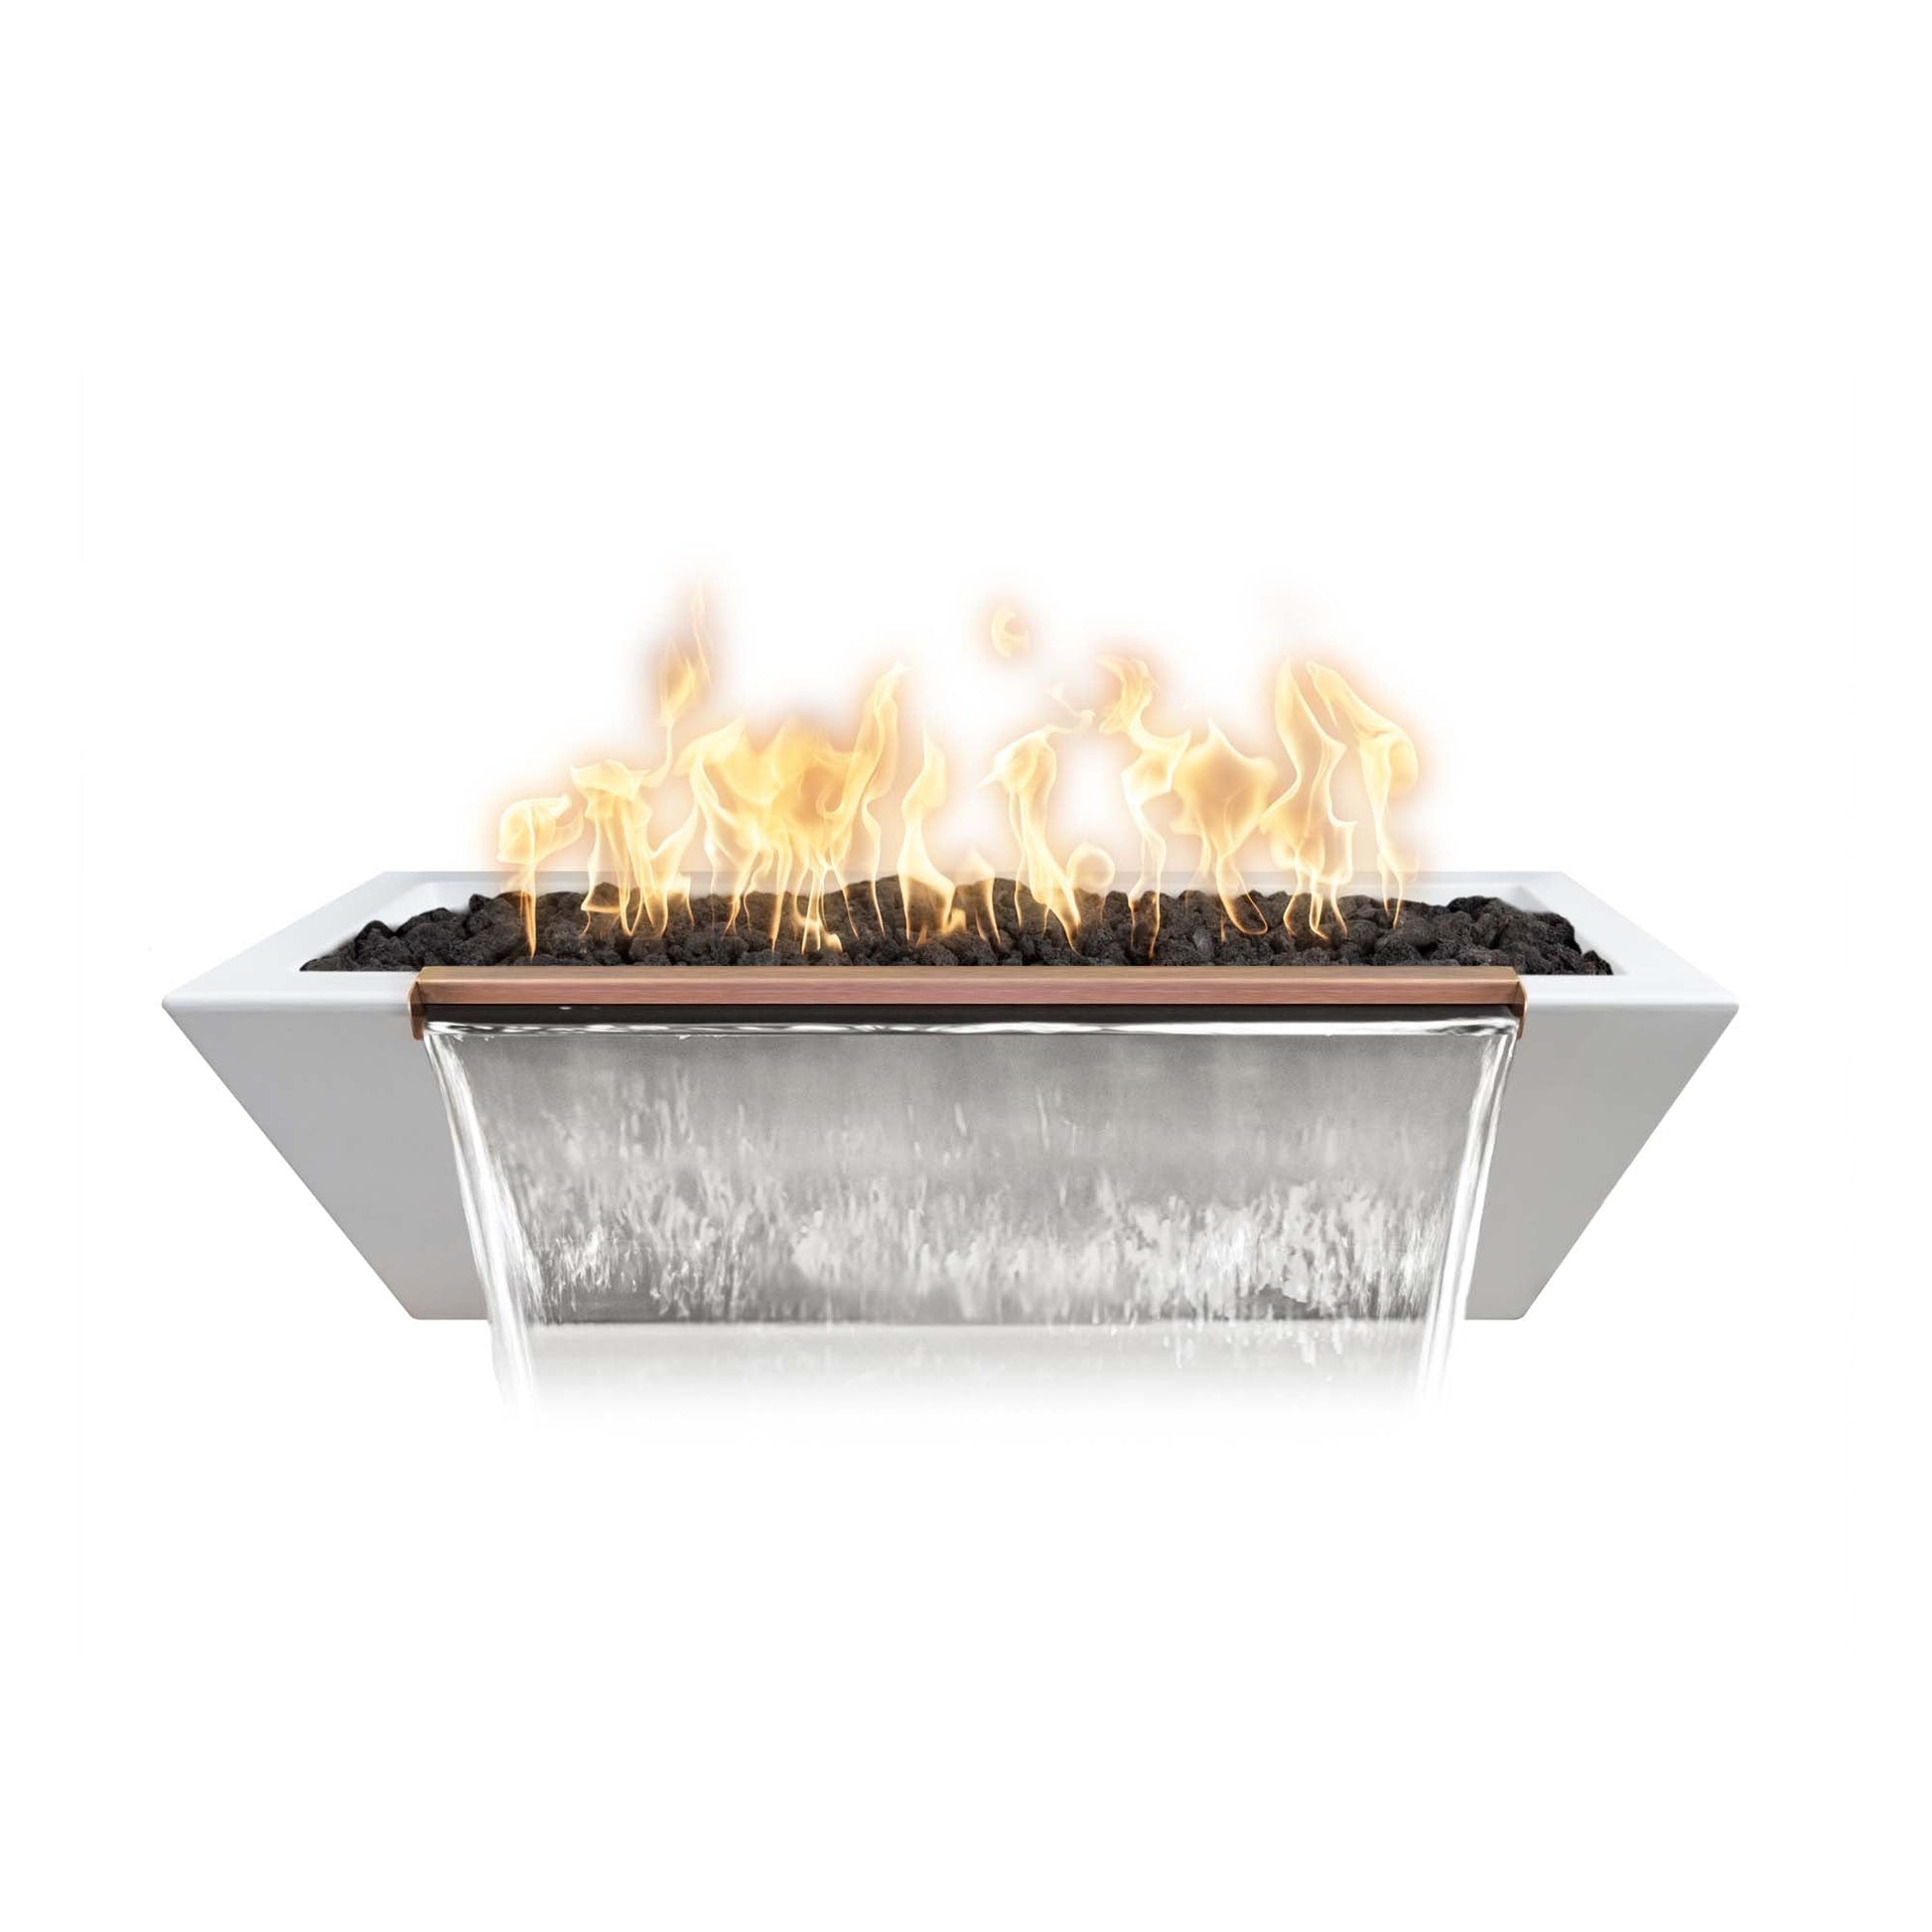 The Outdoor Plus Linear Maya 72" White GFRC Concrete Natural Gas Fire & Water Bowl with Match Lit with Flame Sense Ignition